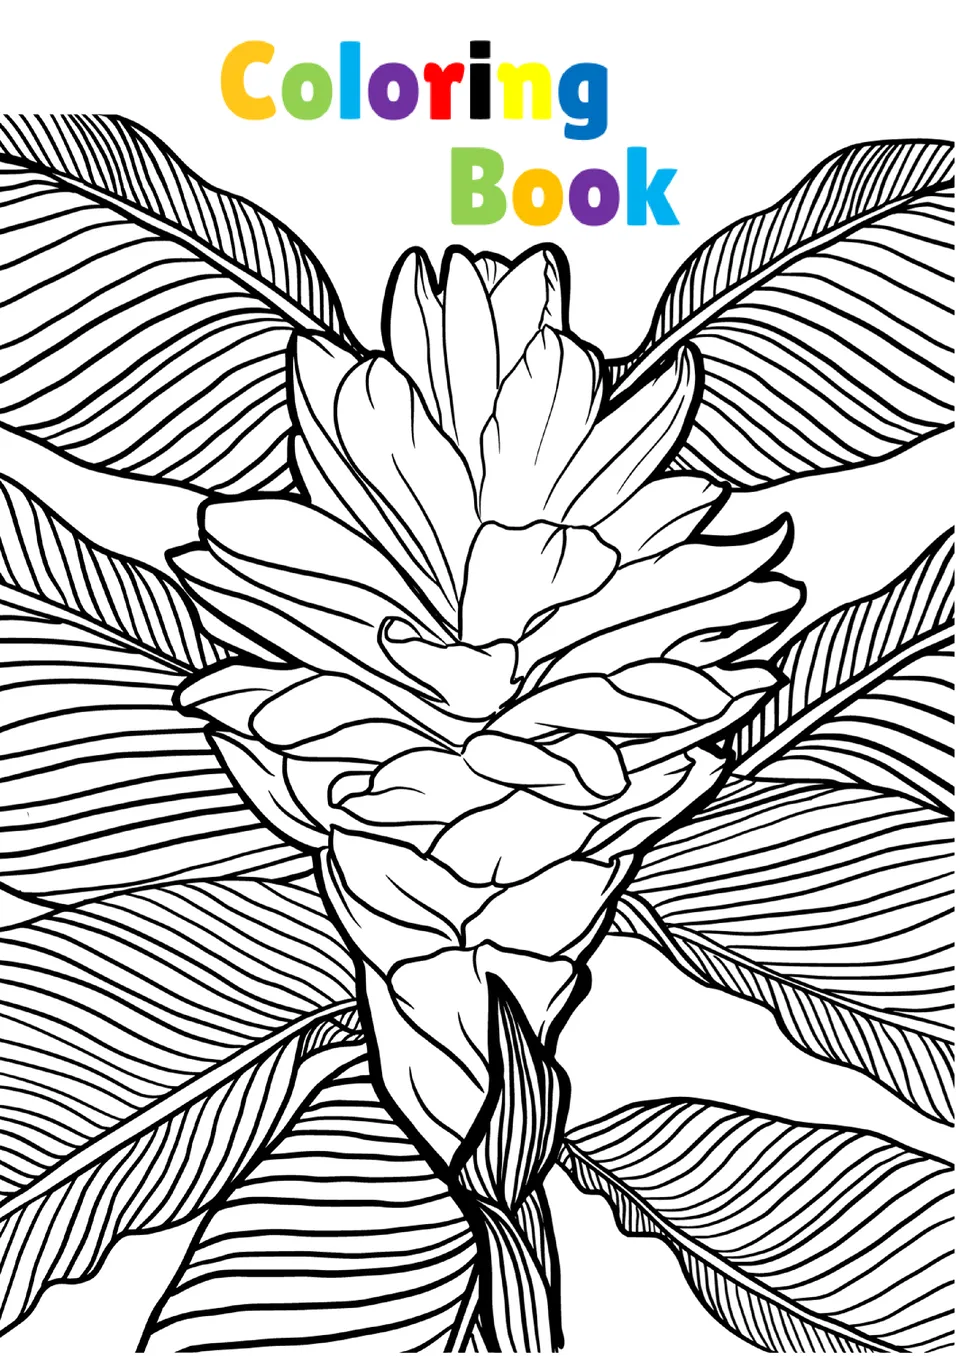 Coloring Book Template